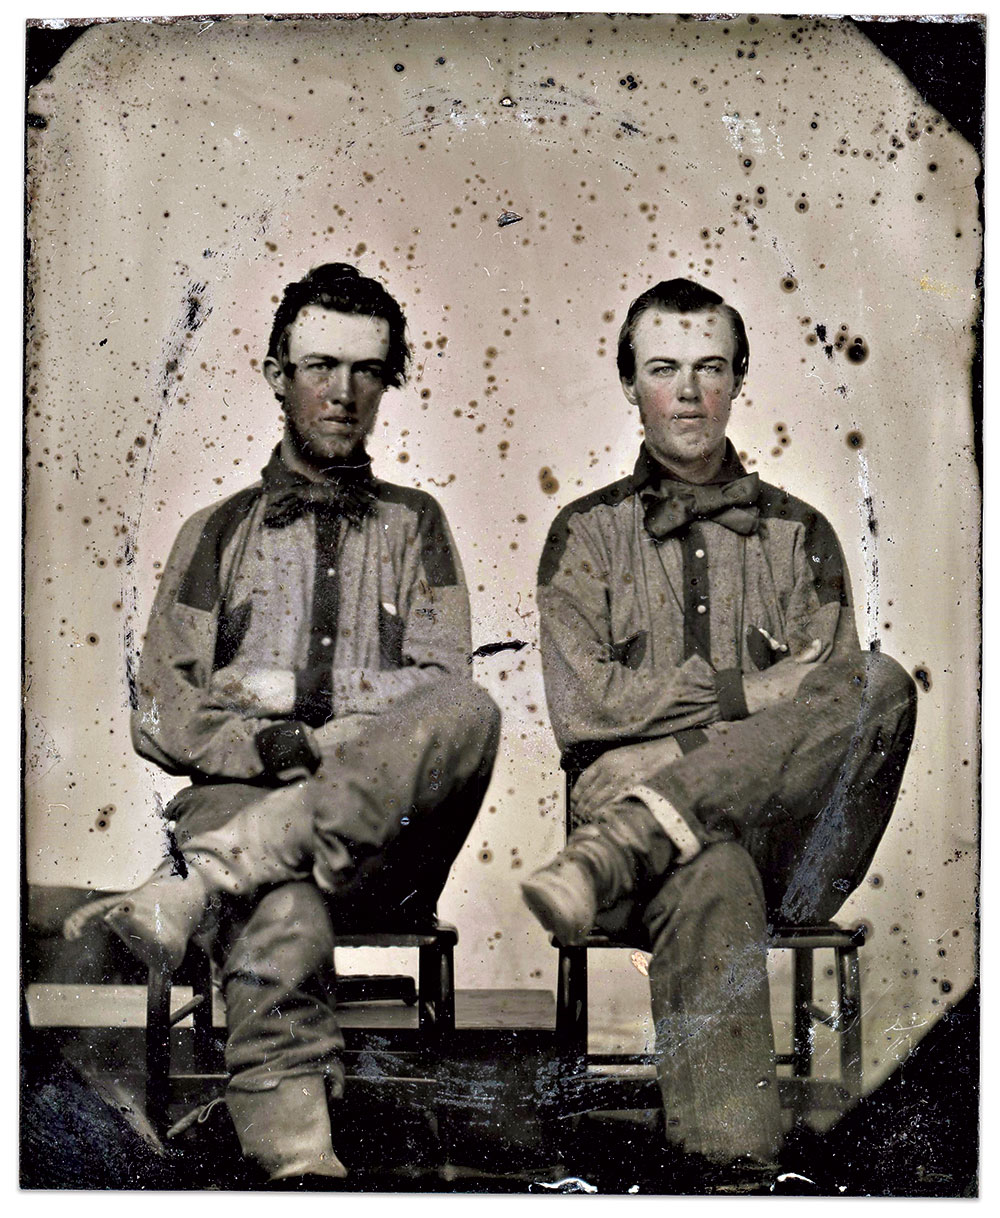 Ninth plate tintype by an unidentified photographer. Michael Huston Collection.